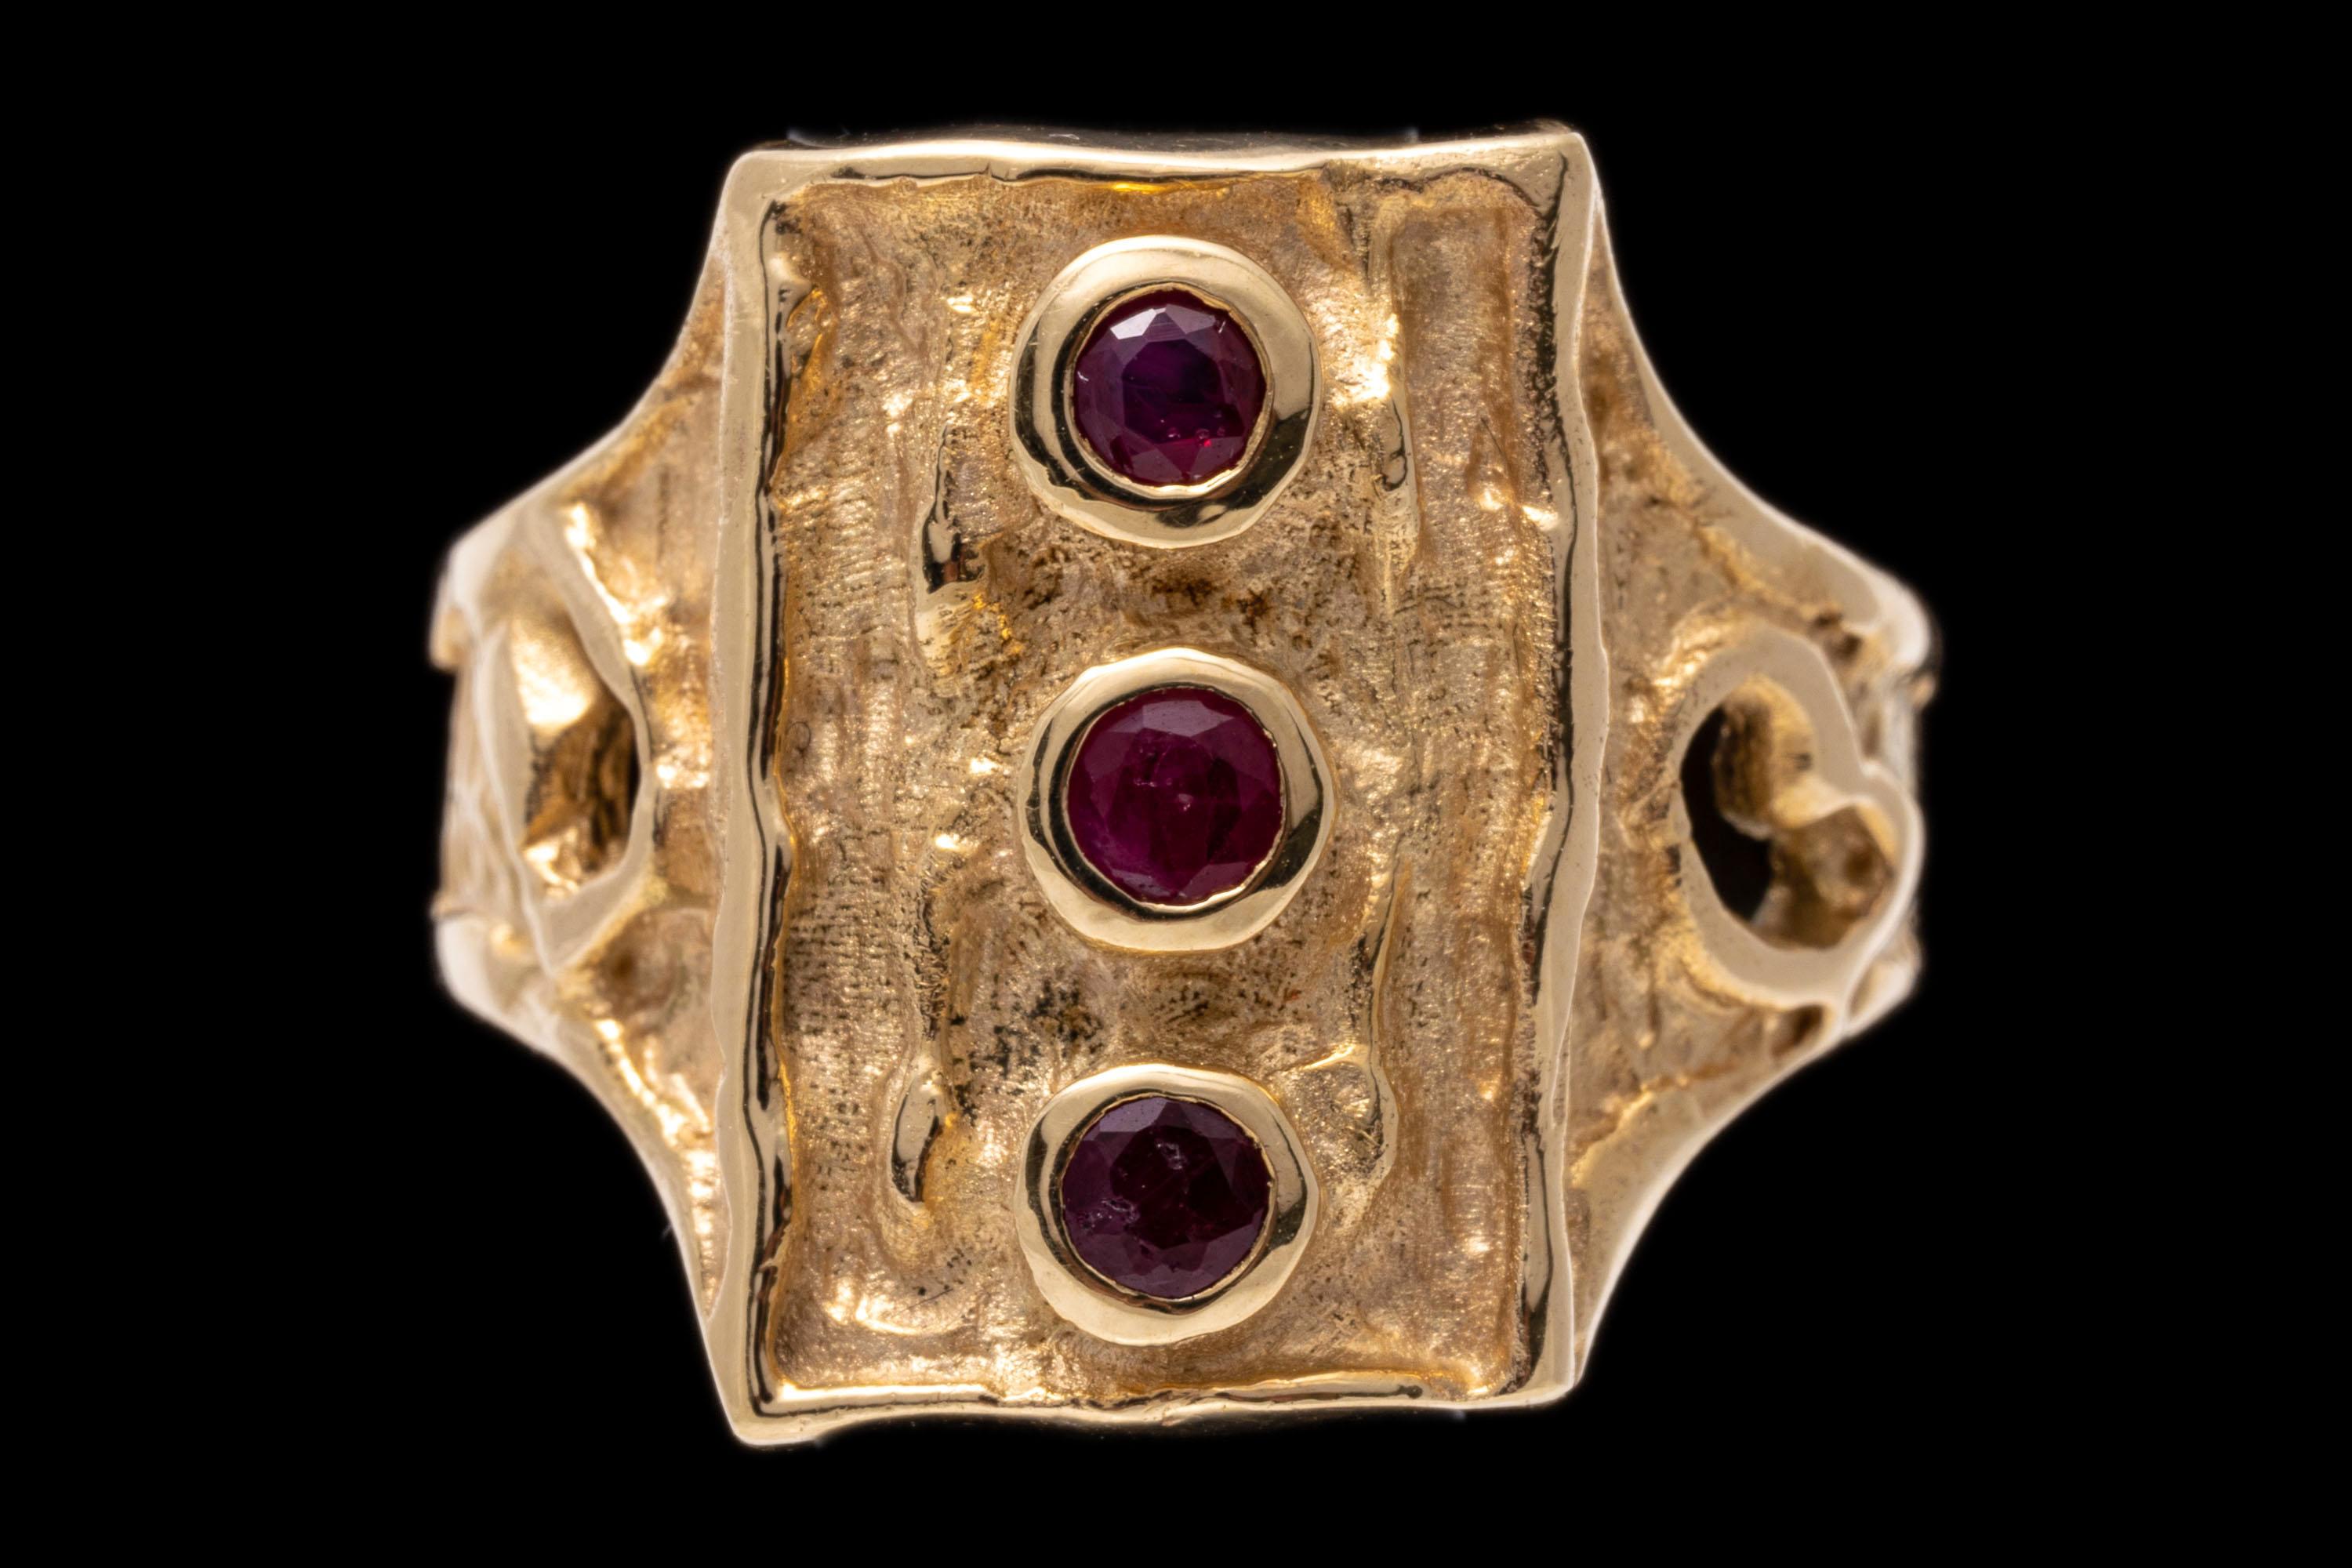 Women's 14k Gold Free Form Rectangular Ruby Set Ring With Melted Patterning, Size 7.75 For Sale